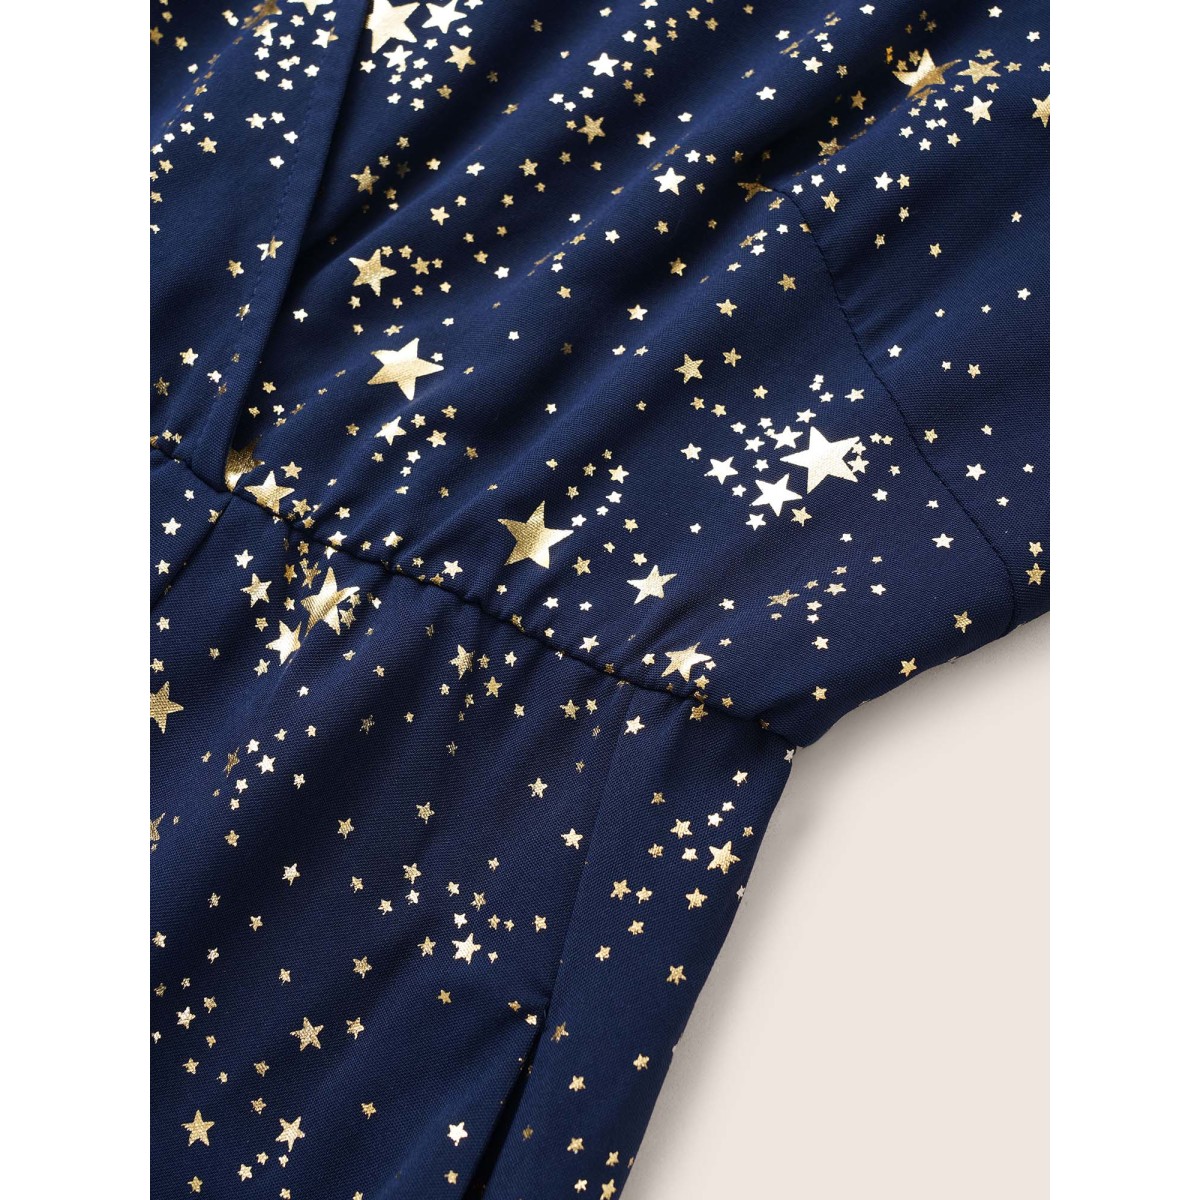 

Moon and Star Galaxy Print Plus Size Dress Women Party Pocket Ruffle Sleeve Short Sleeve V Neck Pocket Going out Long Dress BloomChic, Darkblue